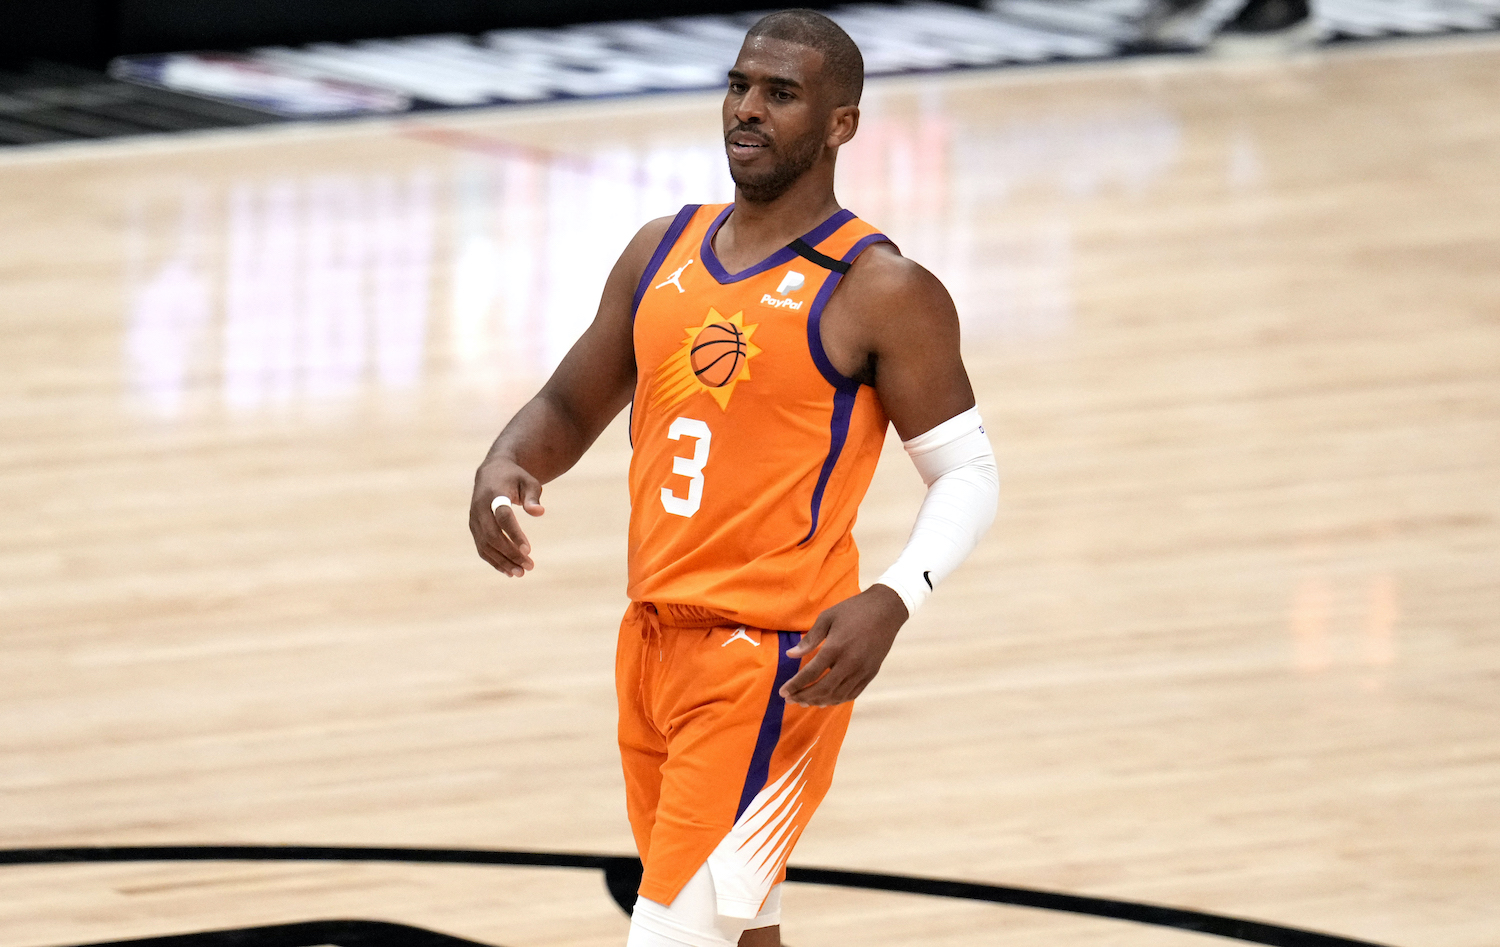 Chris Paul in action as a member of the Phoenix Suns.